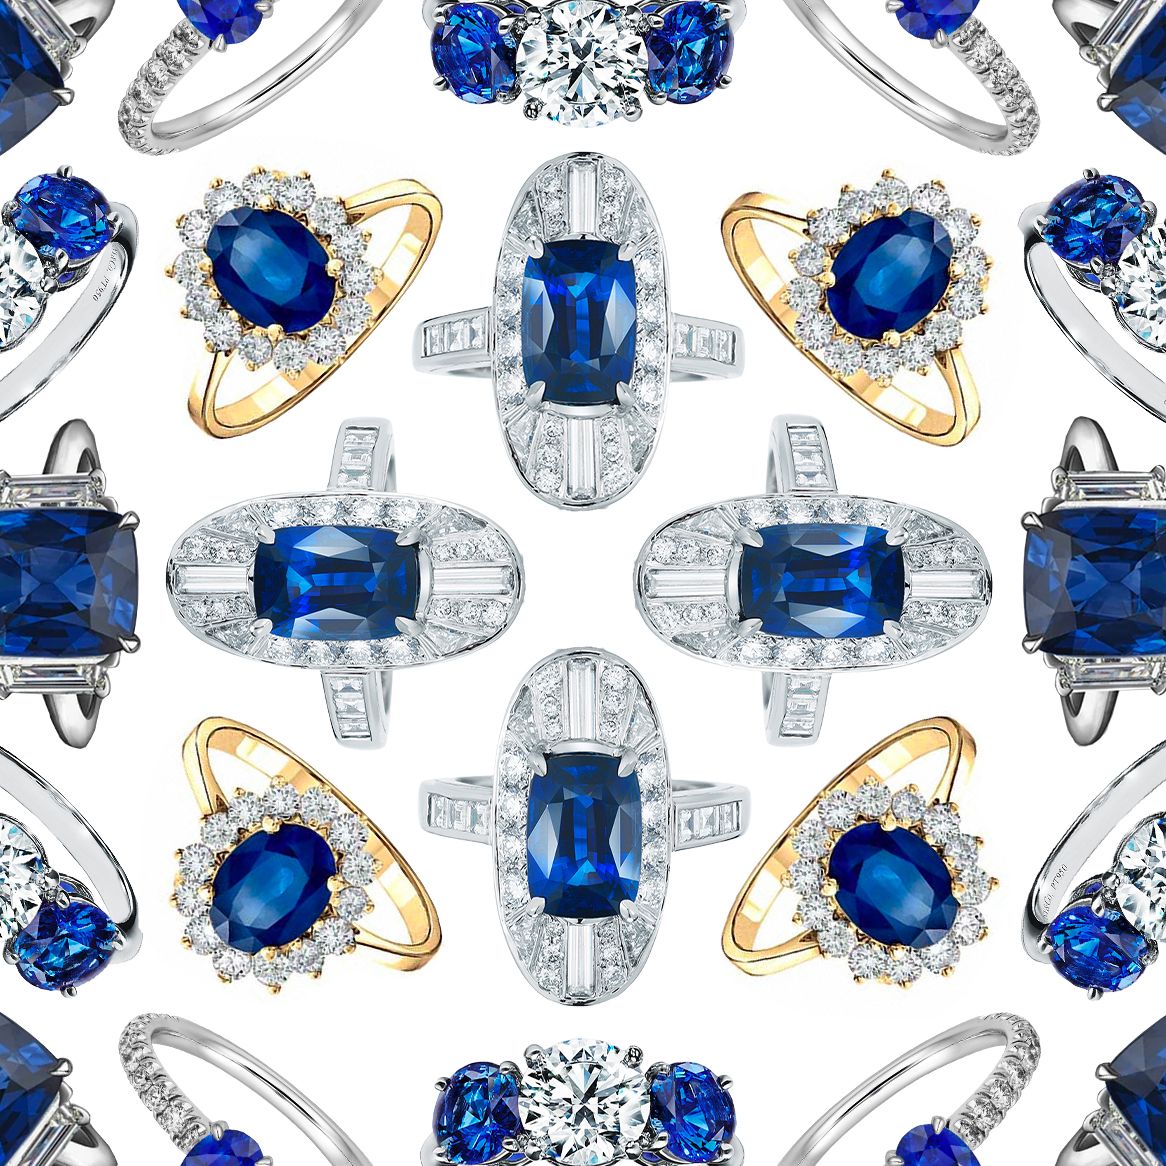 The best sapphire engagement rings